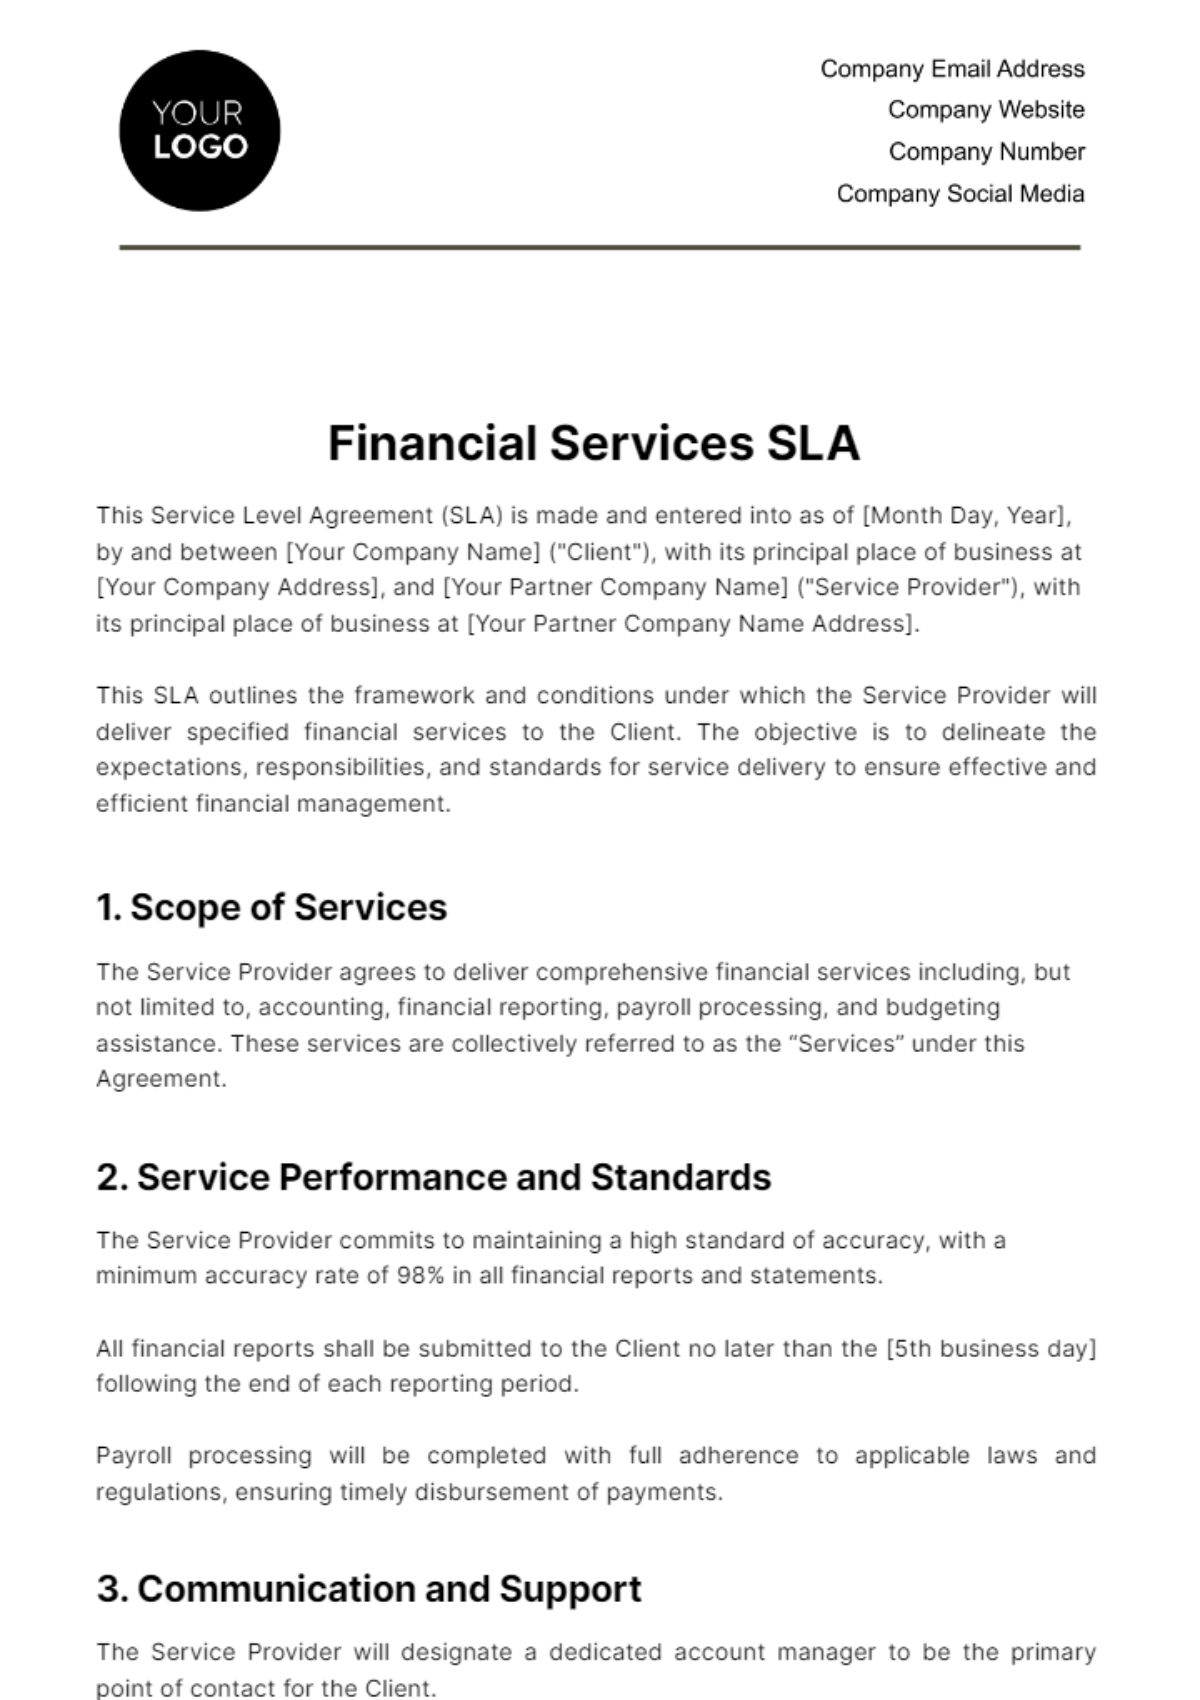 Free Financial Services SLA Template